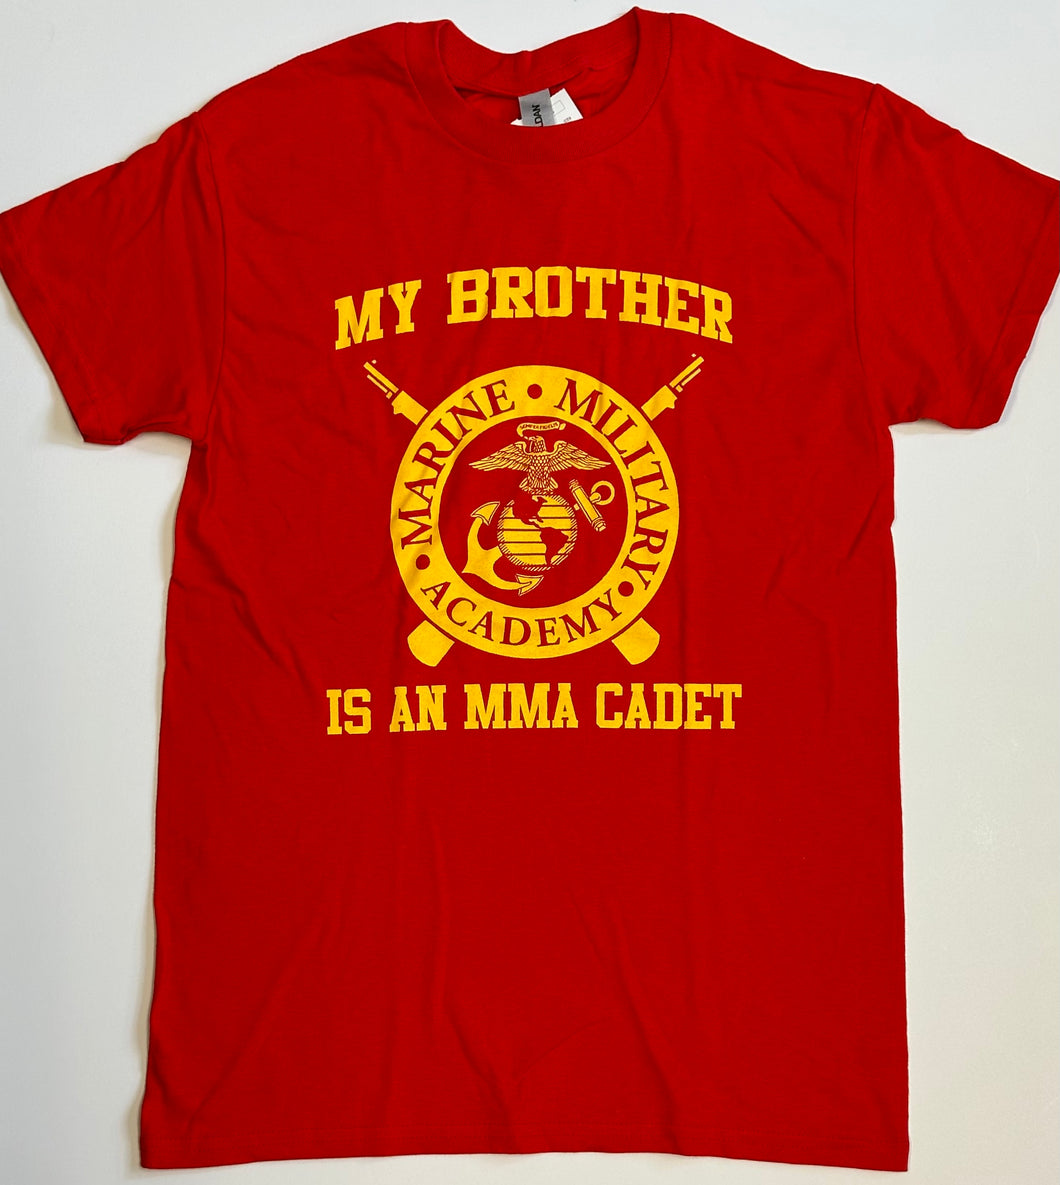 MY BROTHER IS AN MMA CADET T-SHIRT